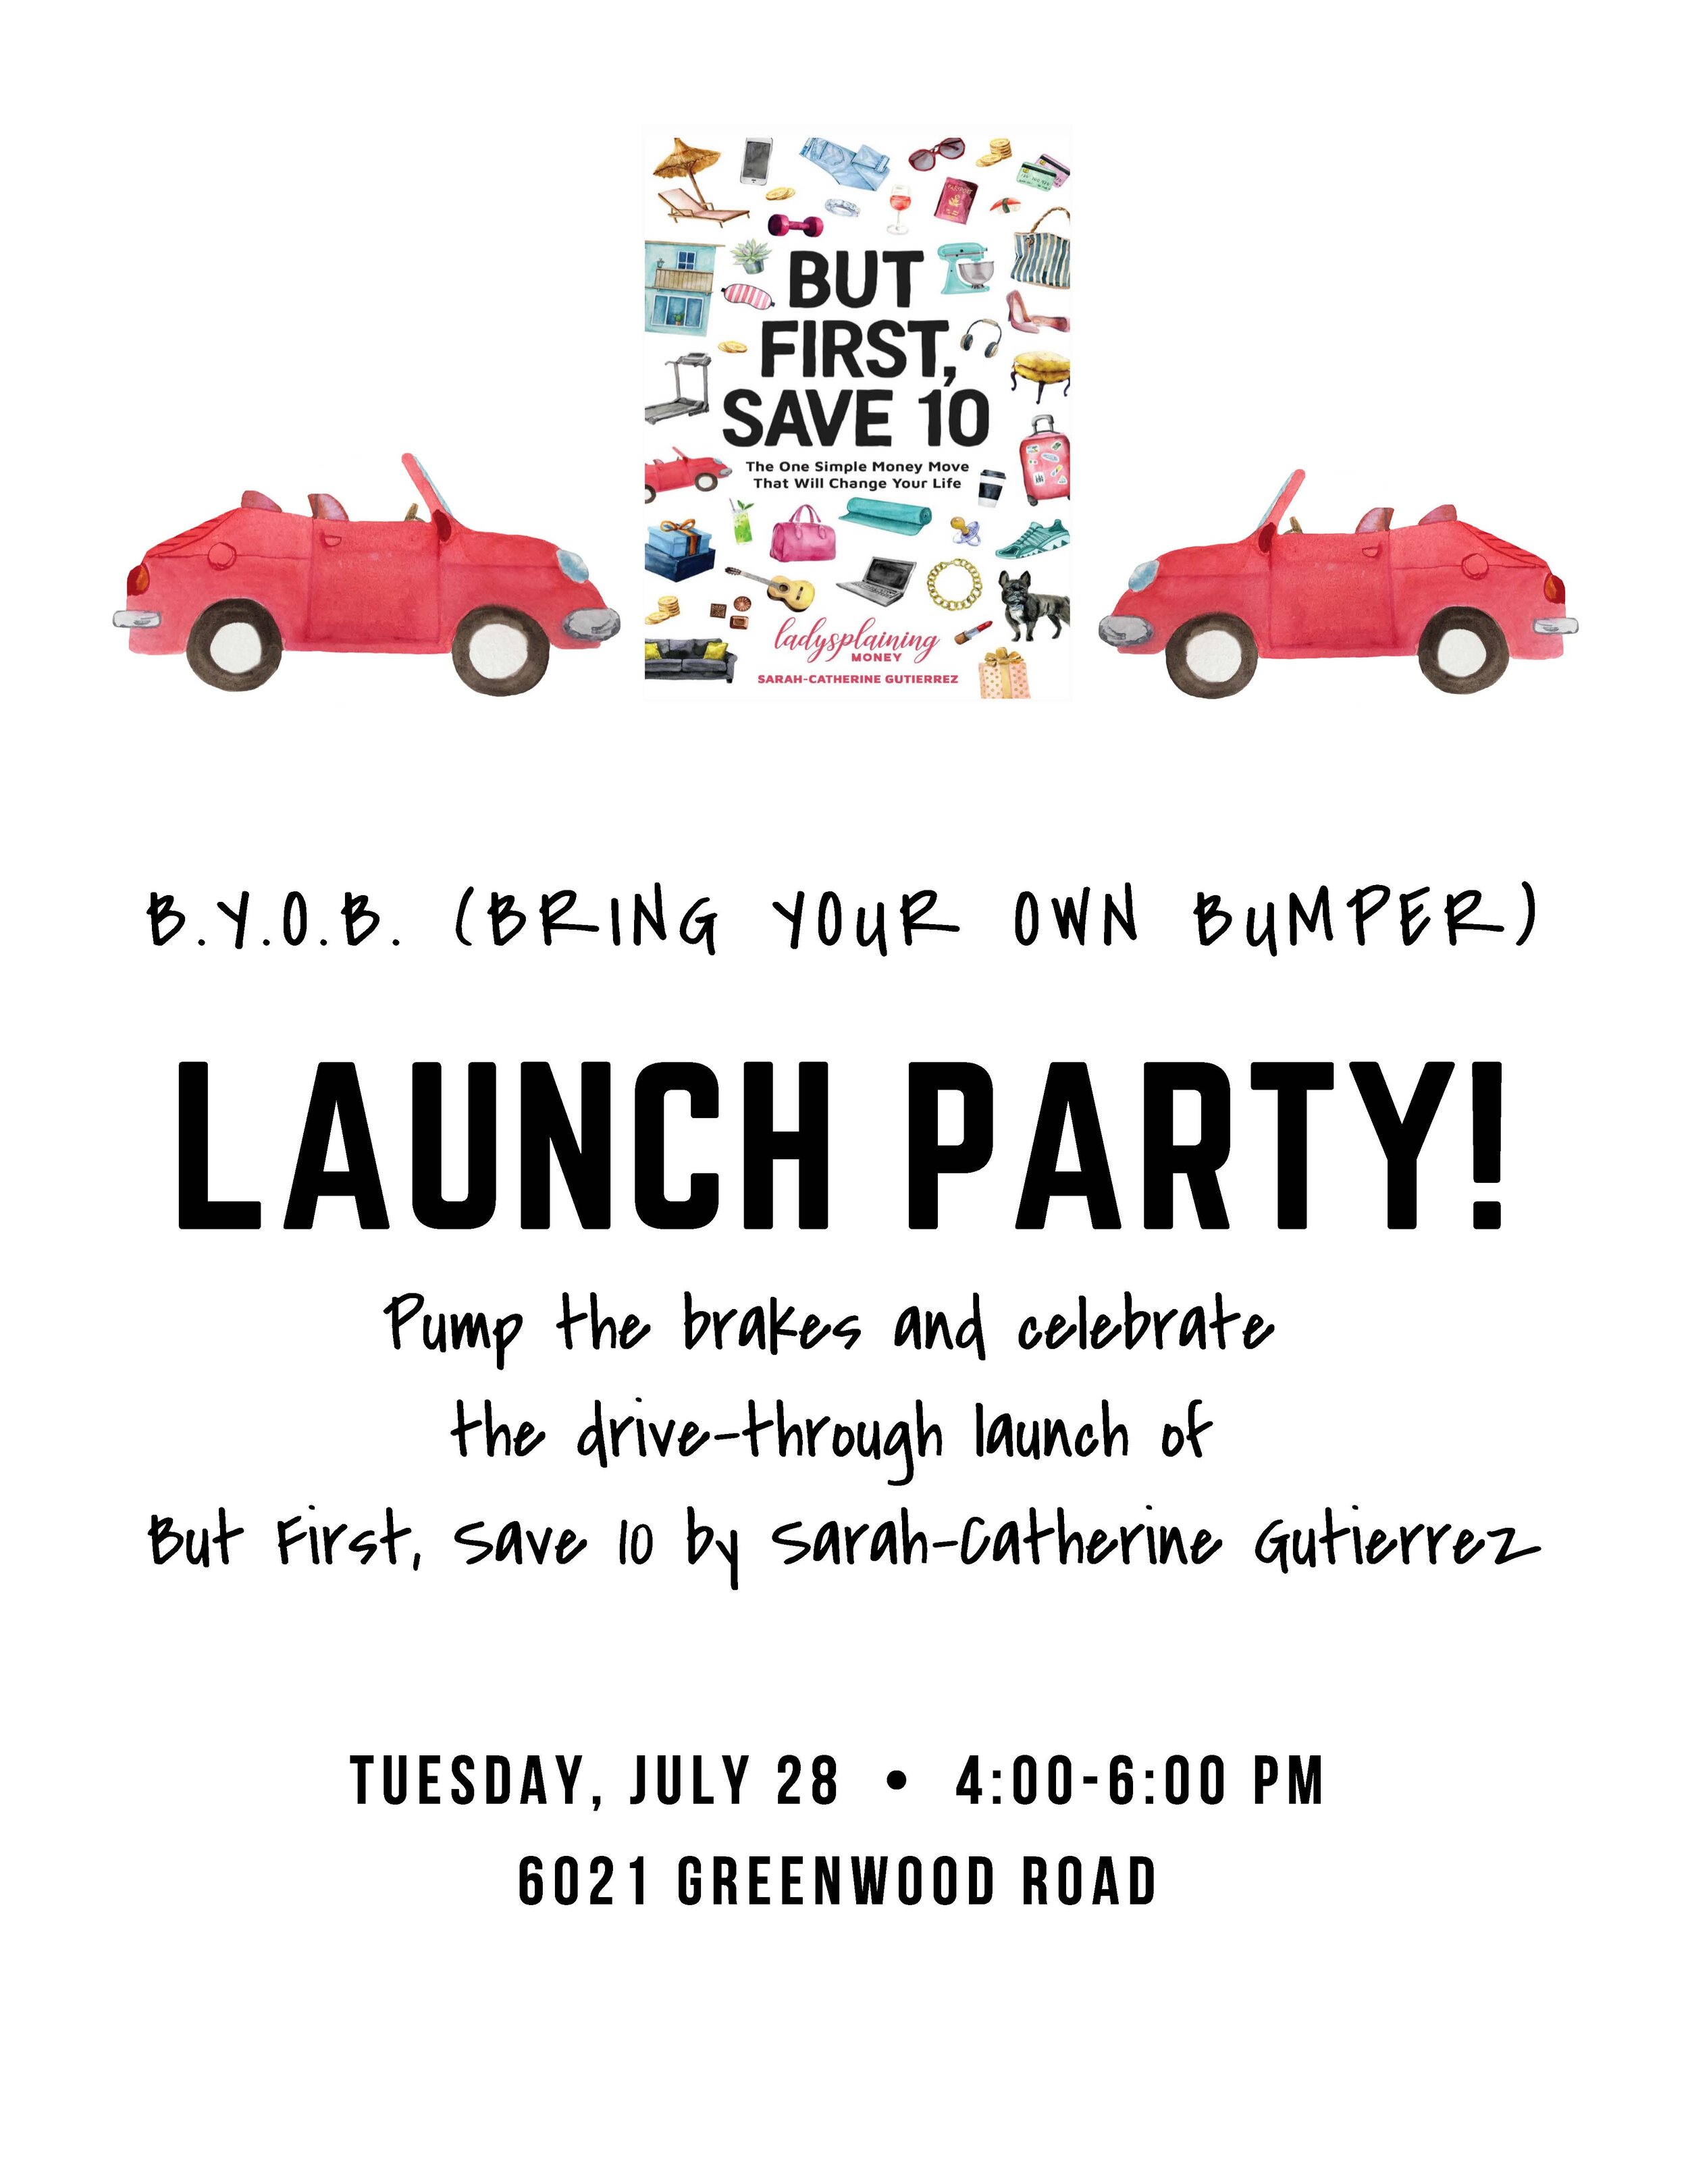 But First Save 10 LAUNCH PARTY INVITE_Page_1.jpg